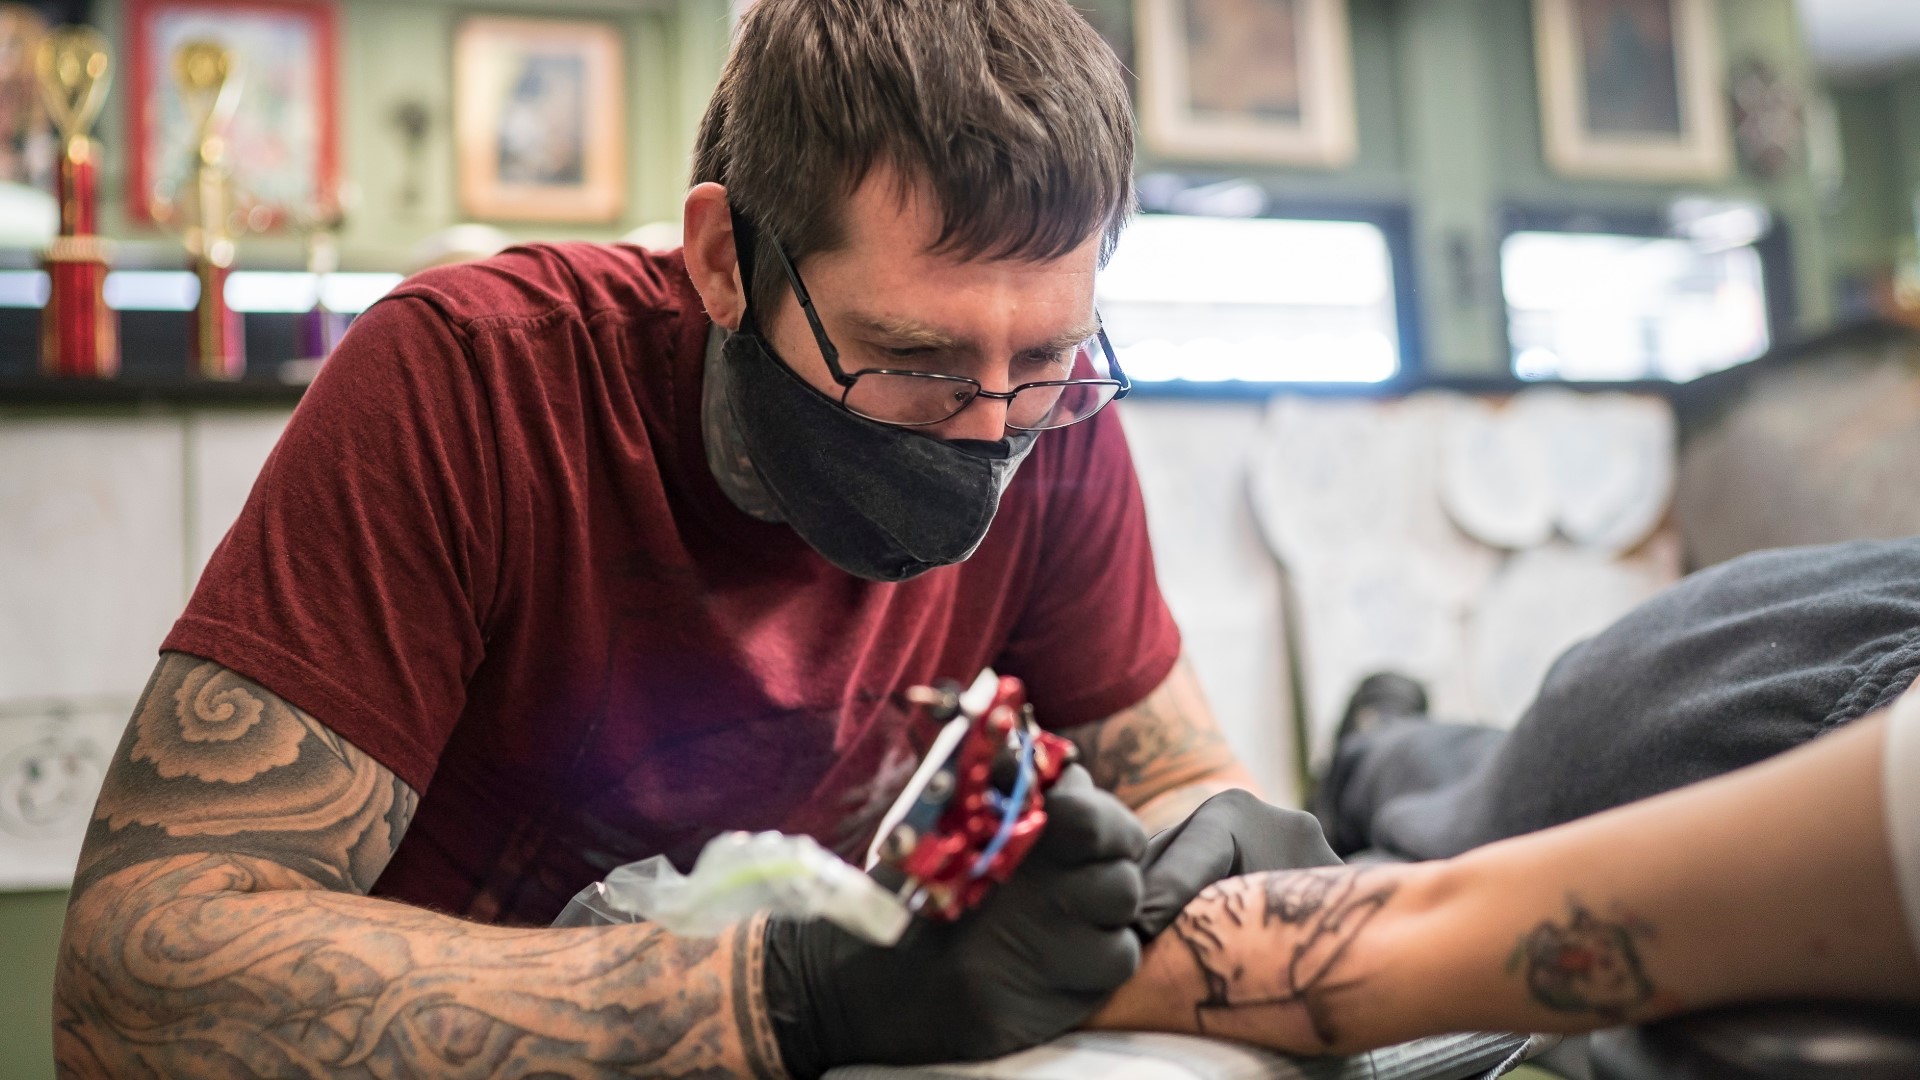 How tattoos shifted from taboo to widely accepted